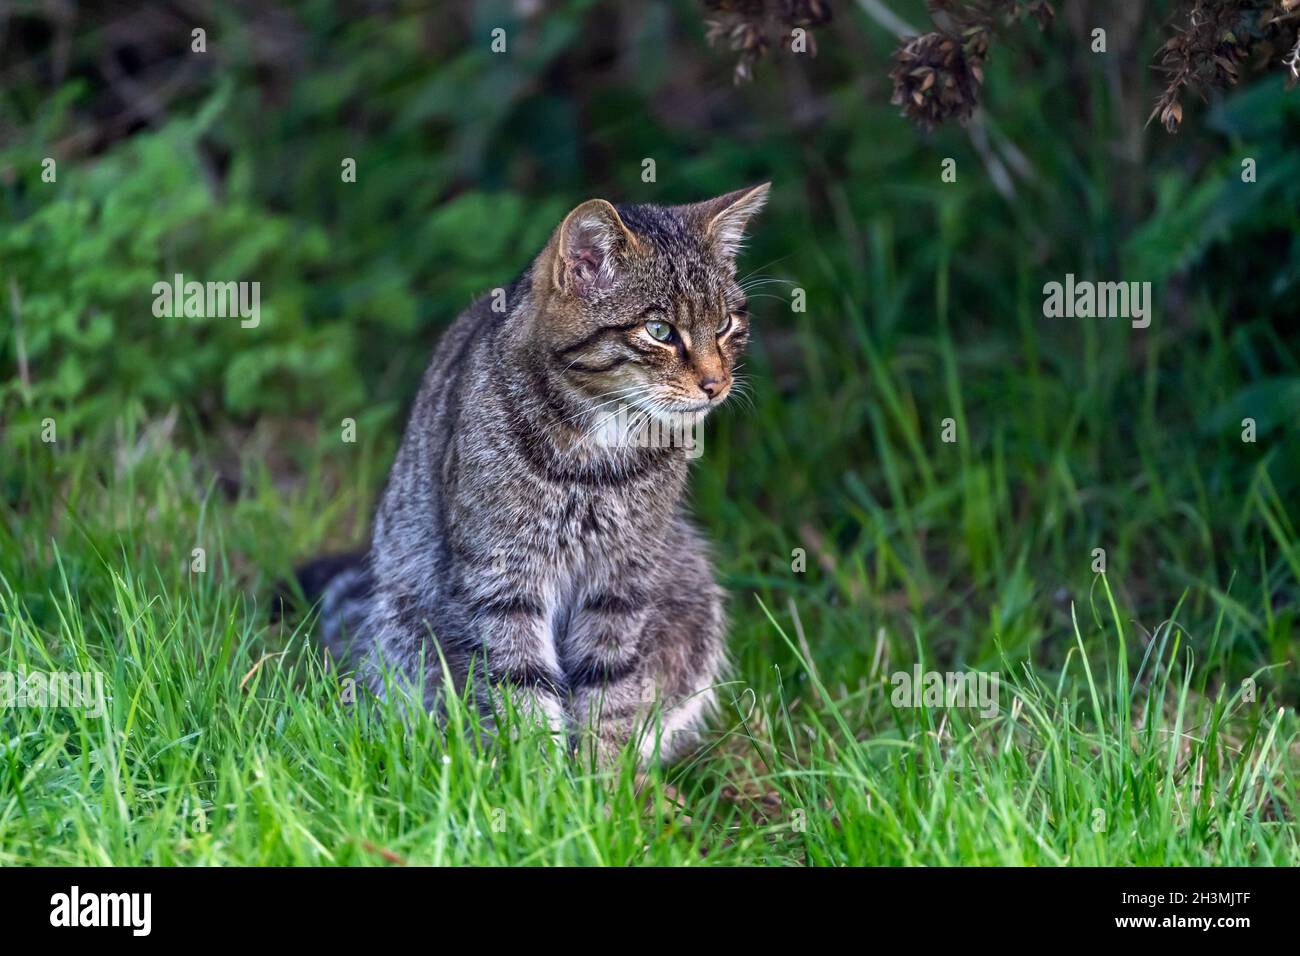 A Scottish Wildcat watches from the long grass of its enclosure at the British Wildlife Centre in Surrey Stock Photo